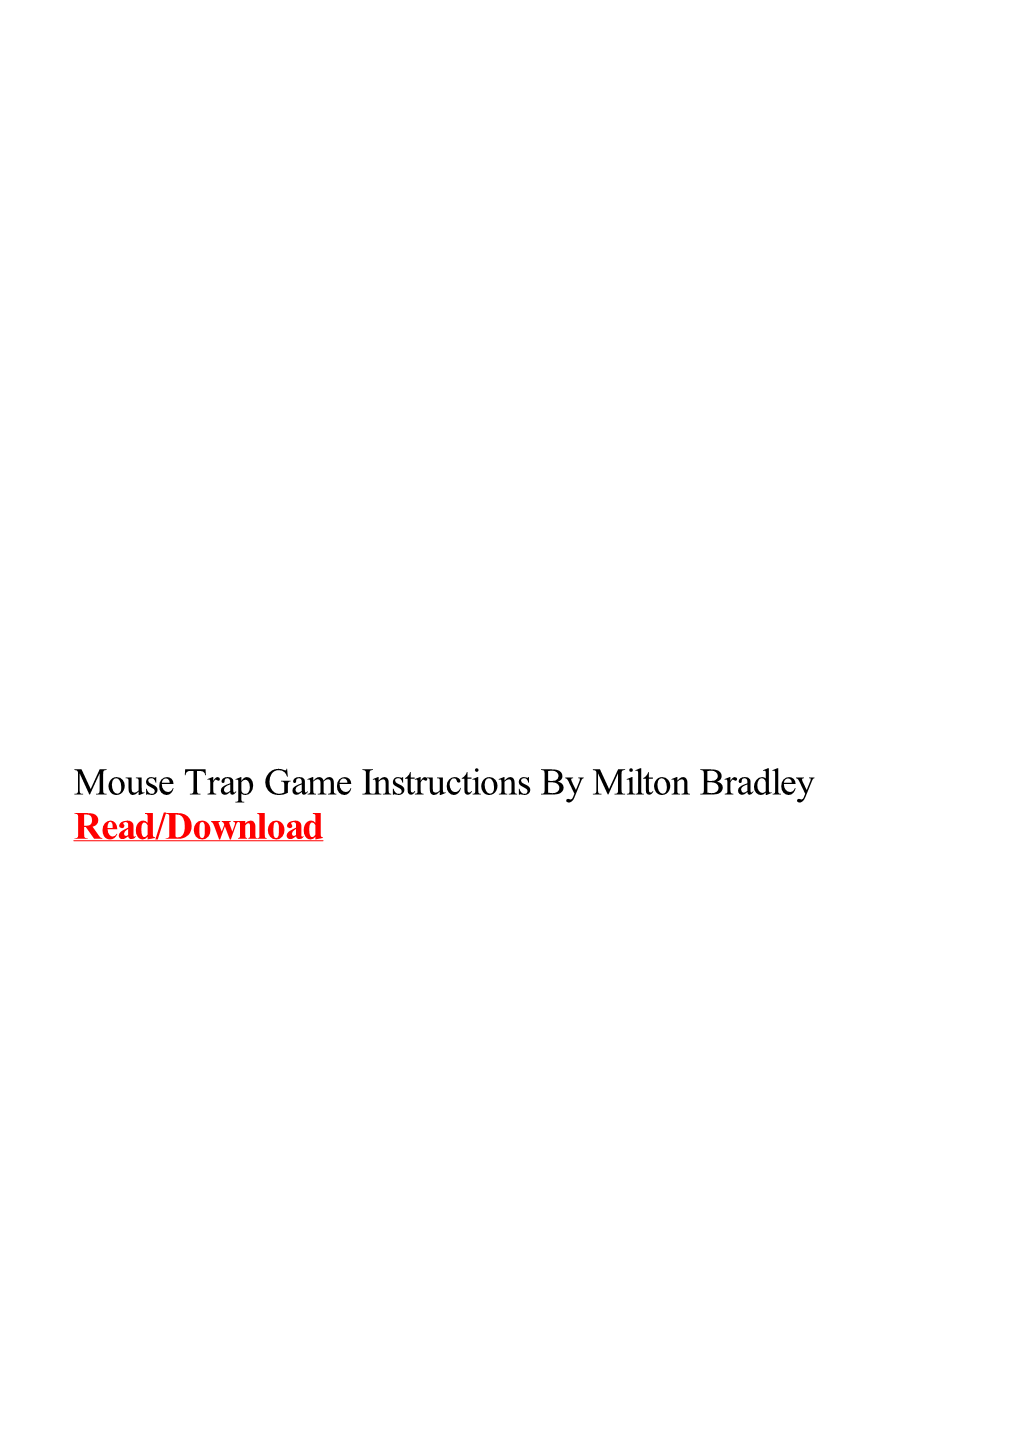 Mouse Trap Game Instructions by Milton Bradley